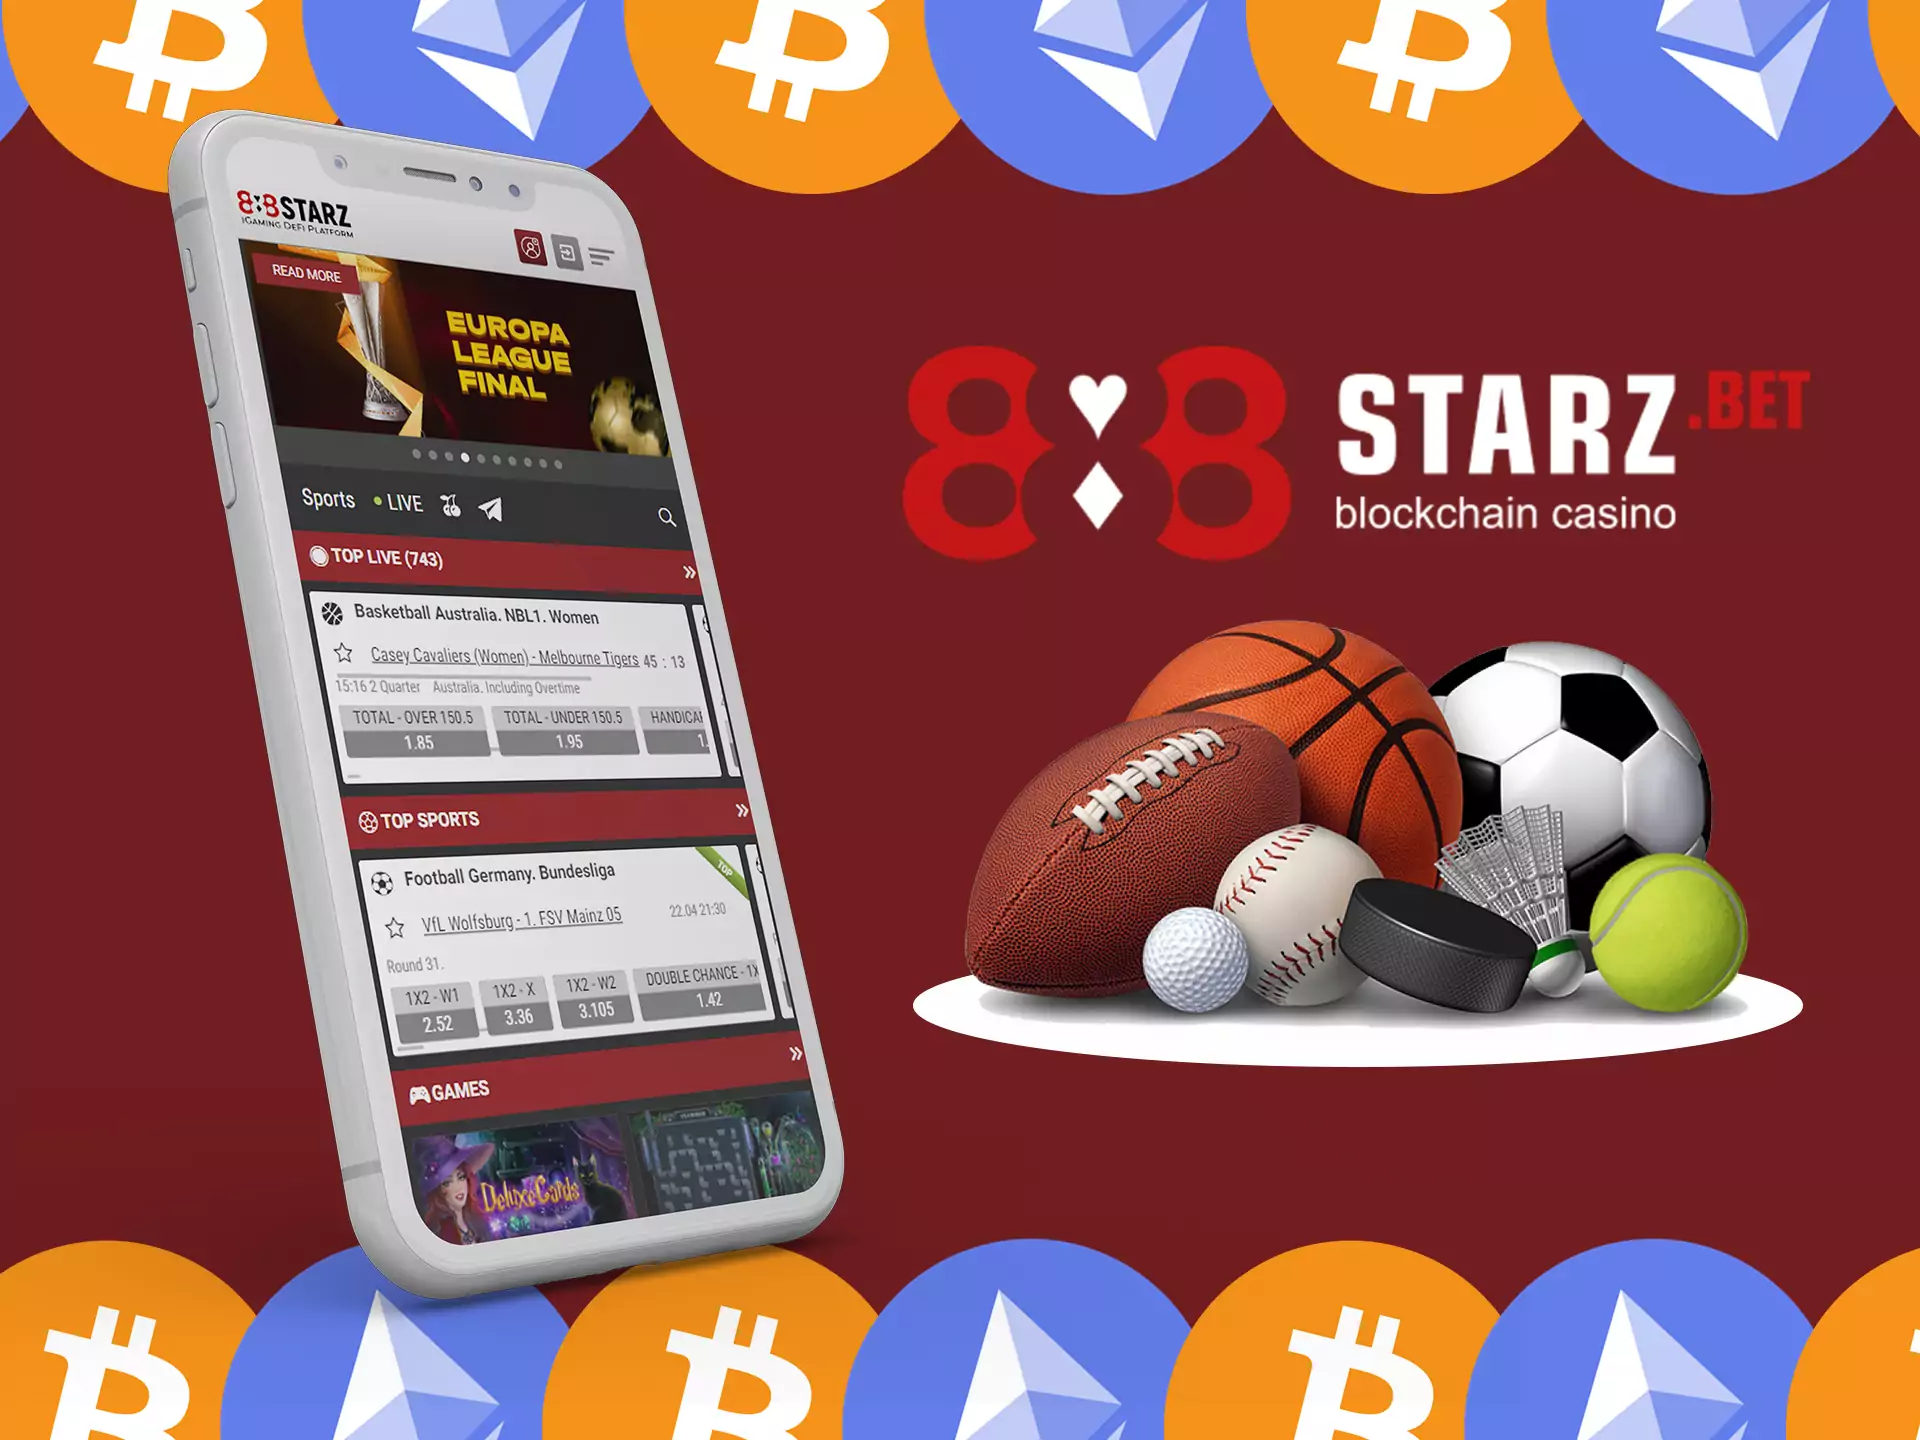 Bet on various types of sports at 888starz.